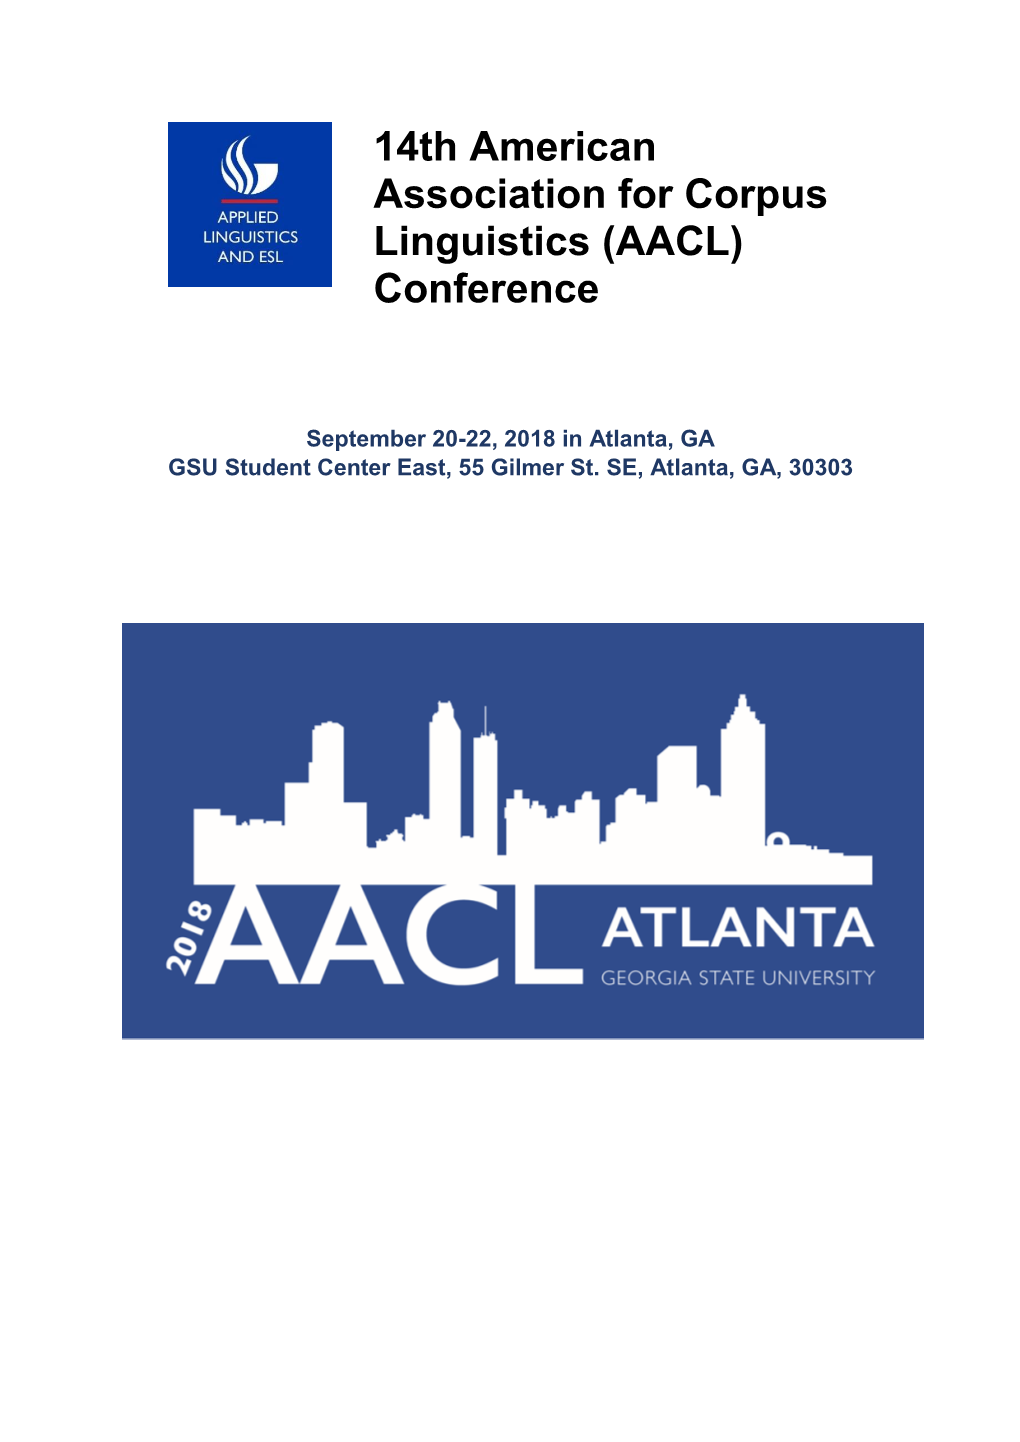 14Th American Association for Corpus Linguistics (AACL) Conference